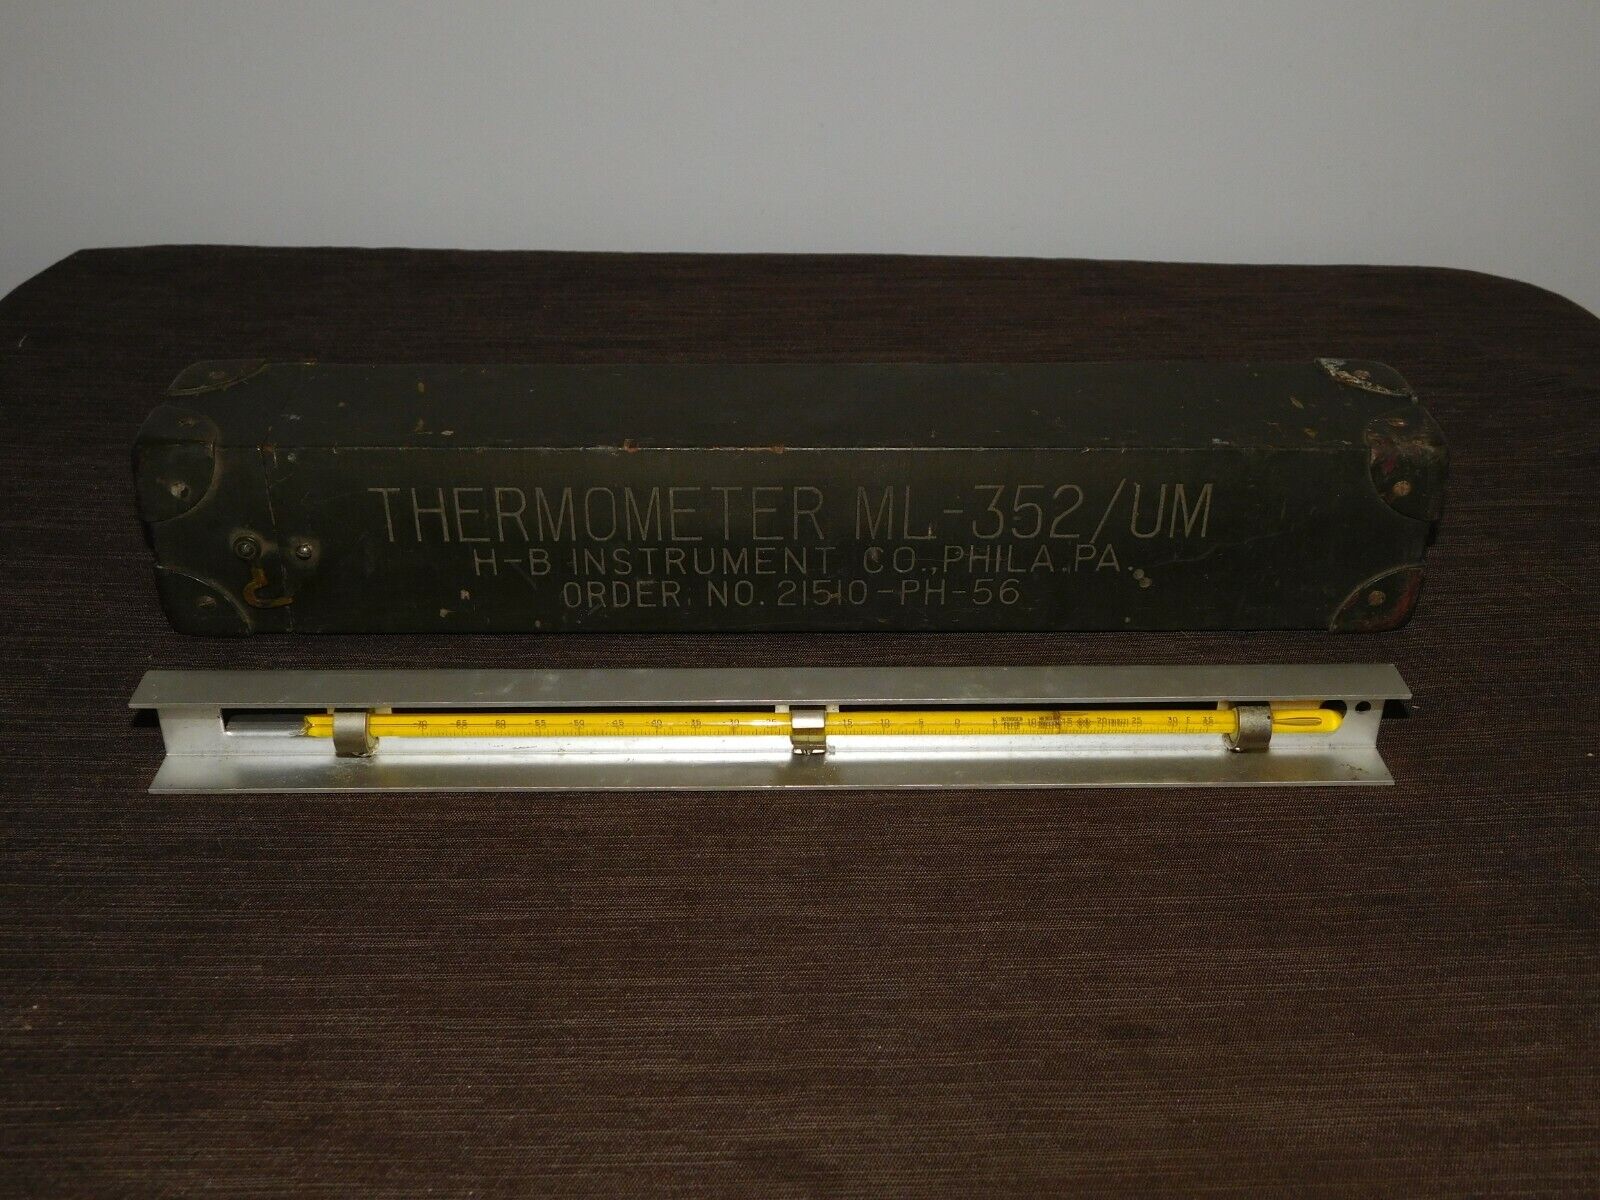 VINTAGE US ARMY H-B INSTRUMENT CO MILITARY THERMOMETER ML-352/UM in WOOD BOX